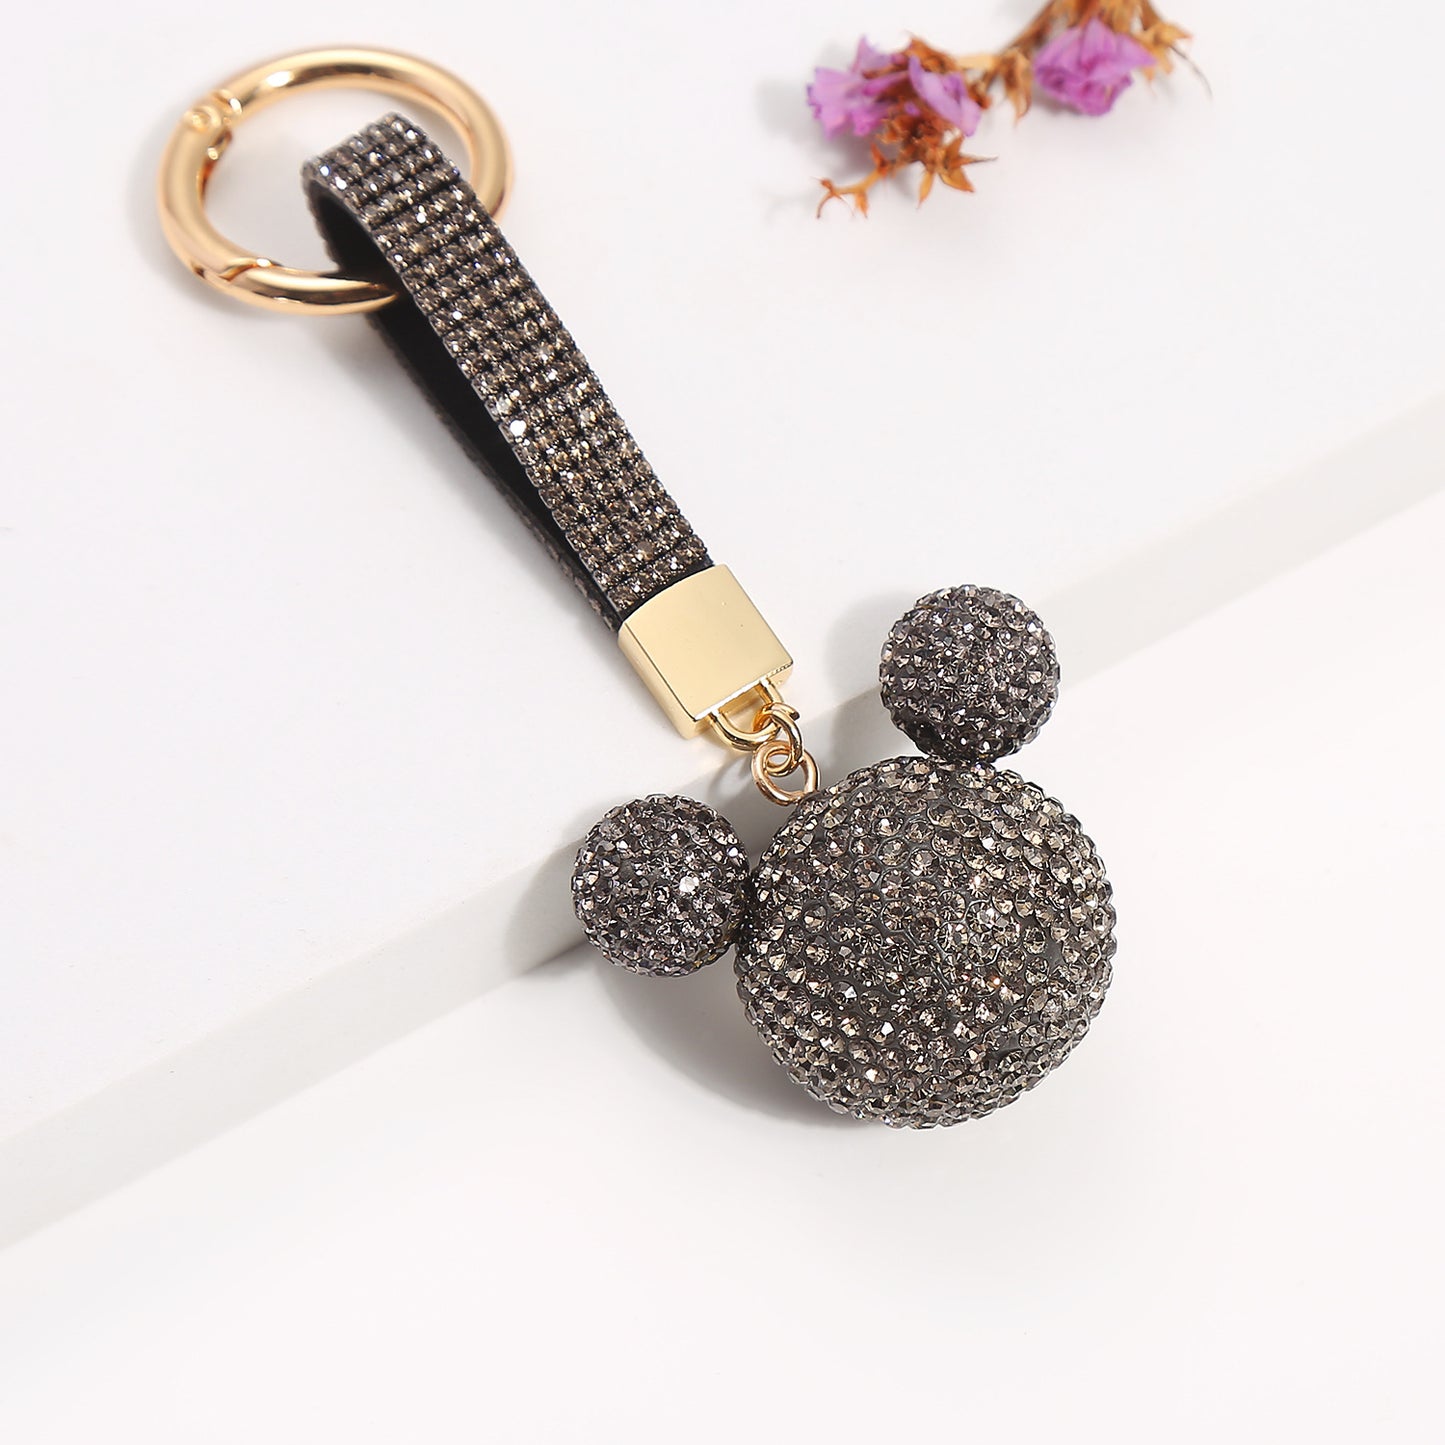 Sparkly Cute Micky Keychains with Rhinestone